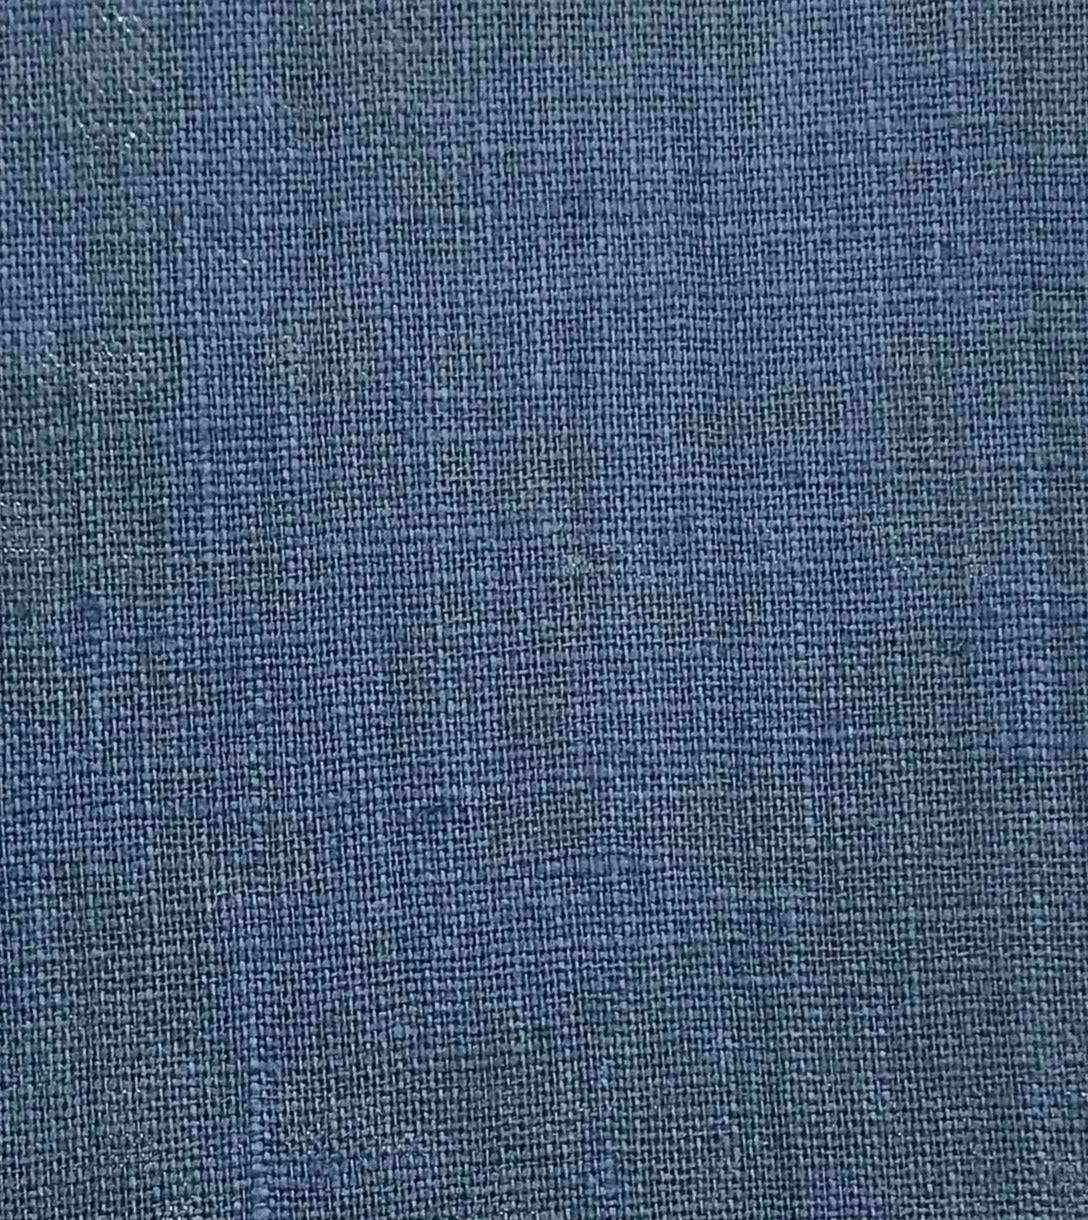 Italy_Blue-6 100% Linen - 3.5 Oz - Solid Blue